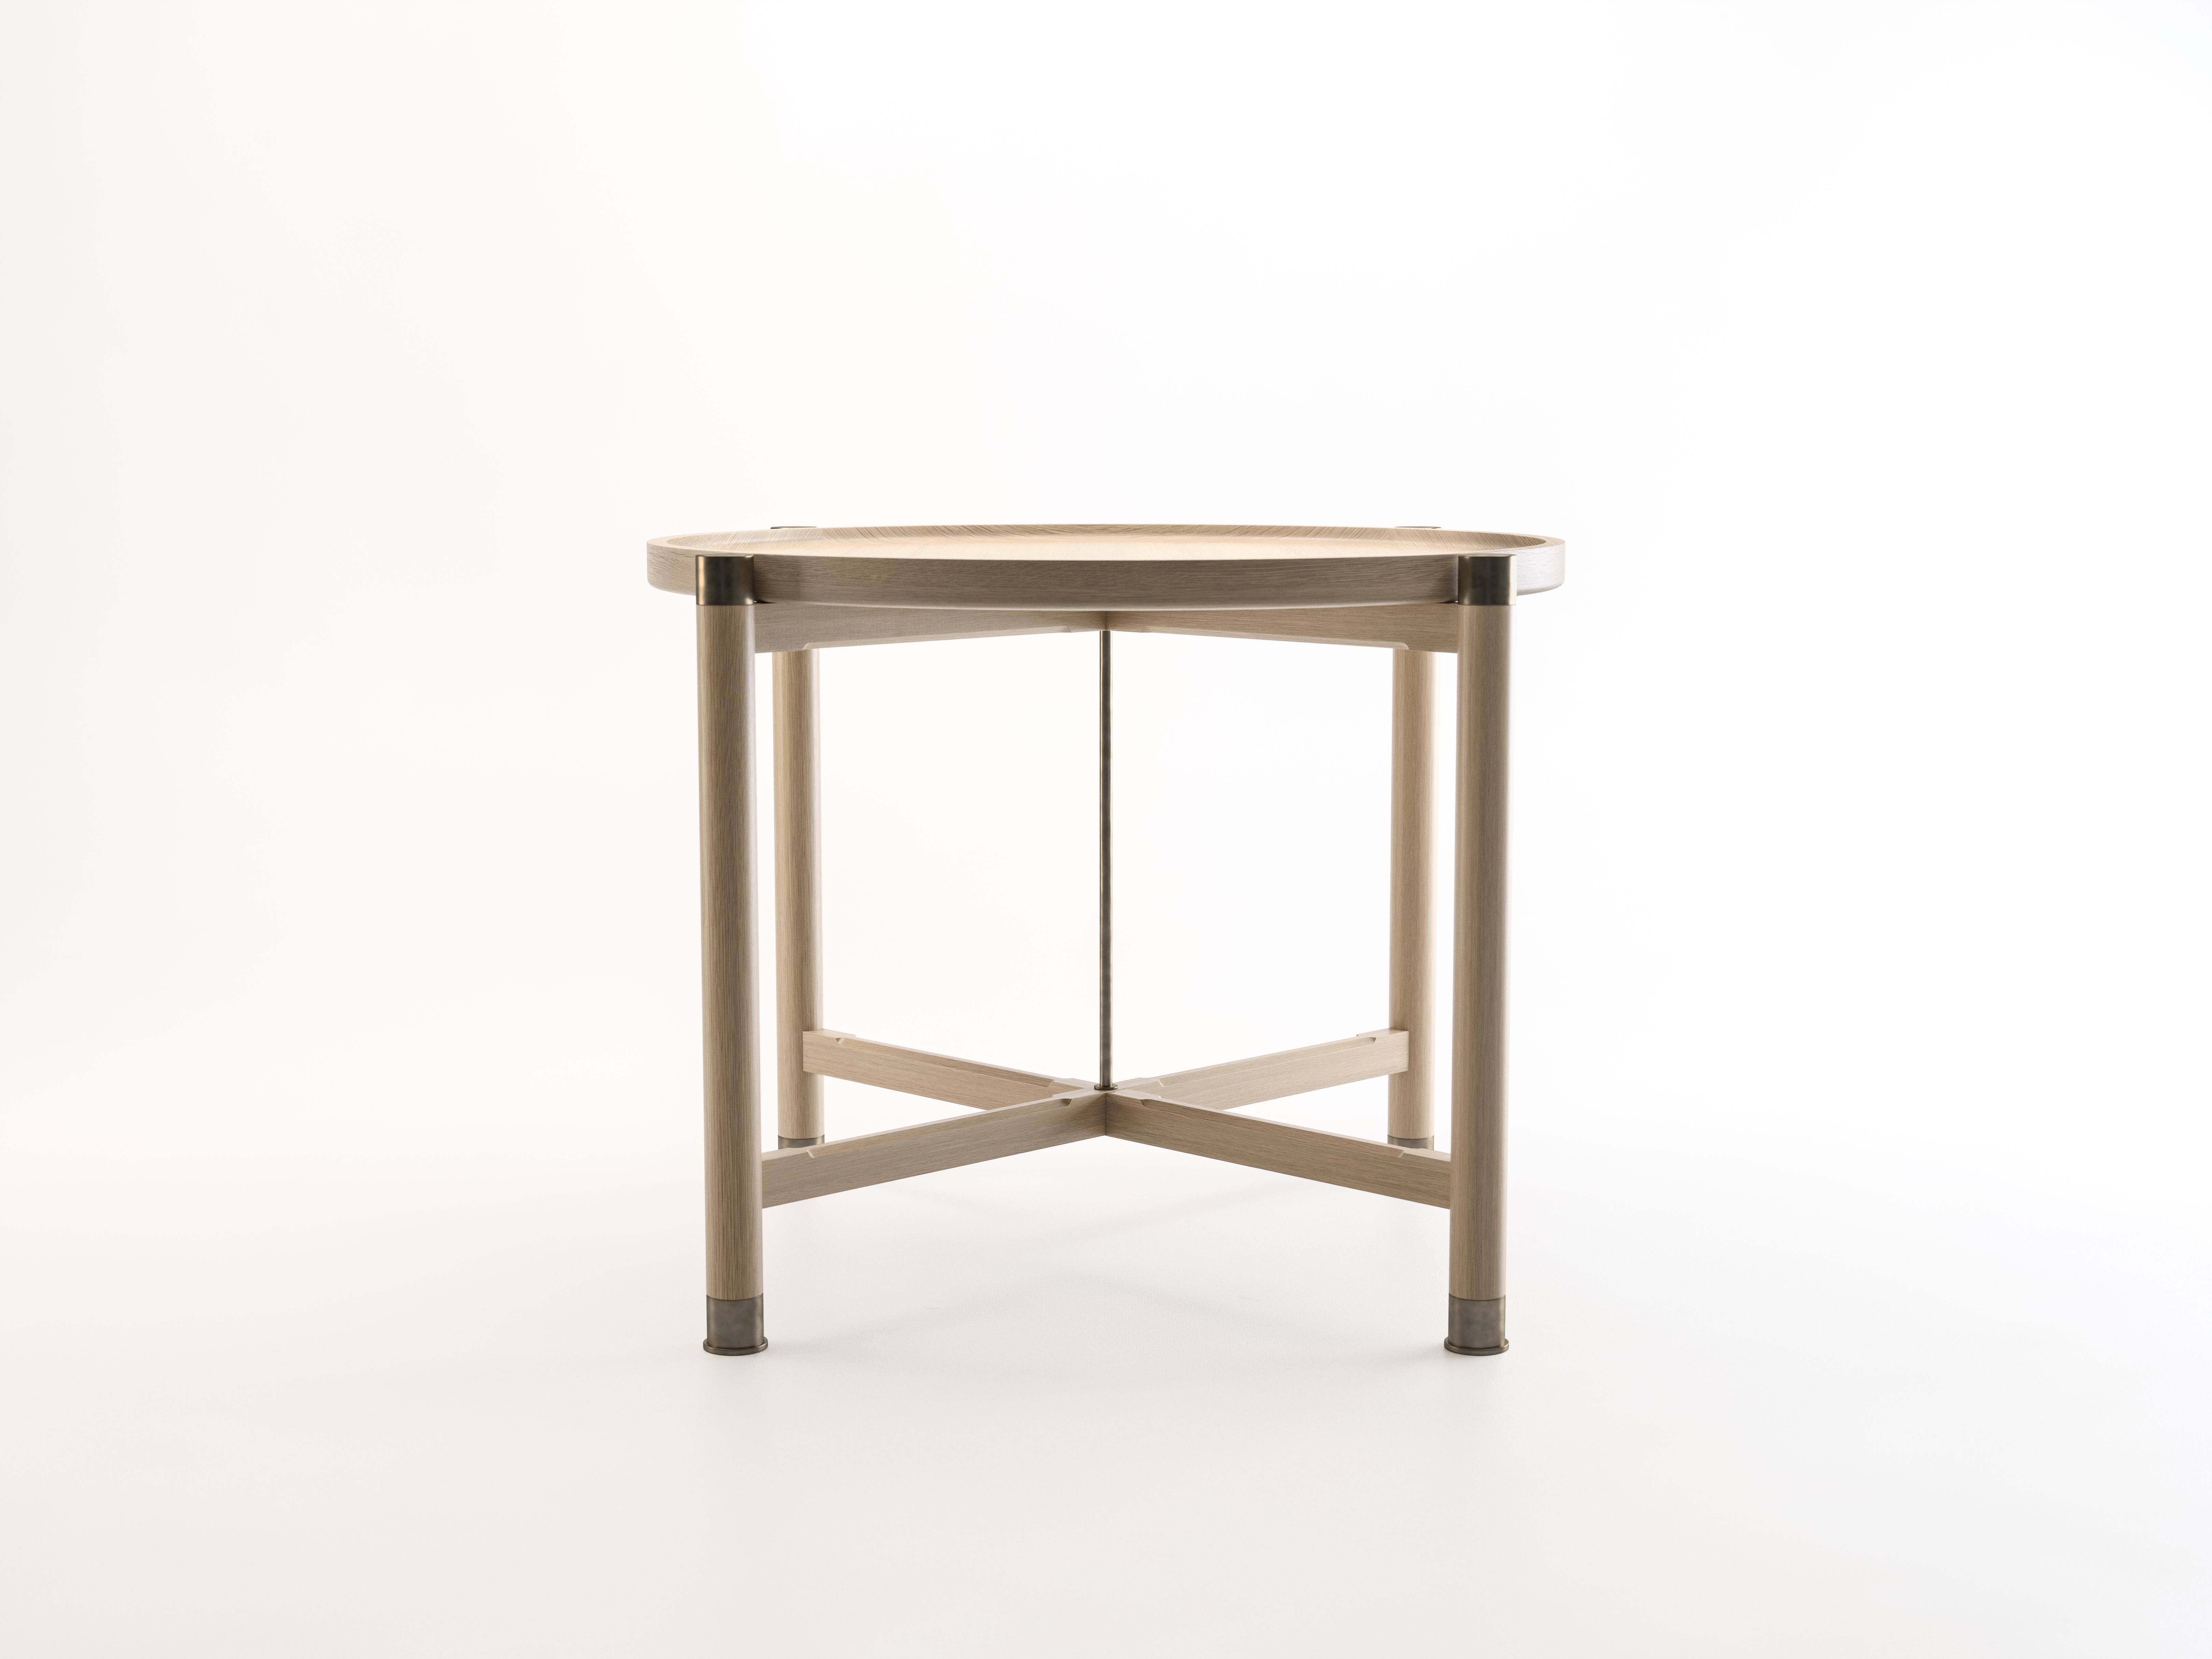 The Otto side table is a generously proportioned table with a simple, well-articulated form.
Available in oak or walnut, it features a round coupe top, substantial antique brass fittings, a central brass stem, and sleek chamfered stretchers. The